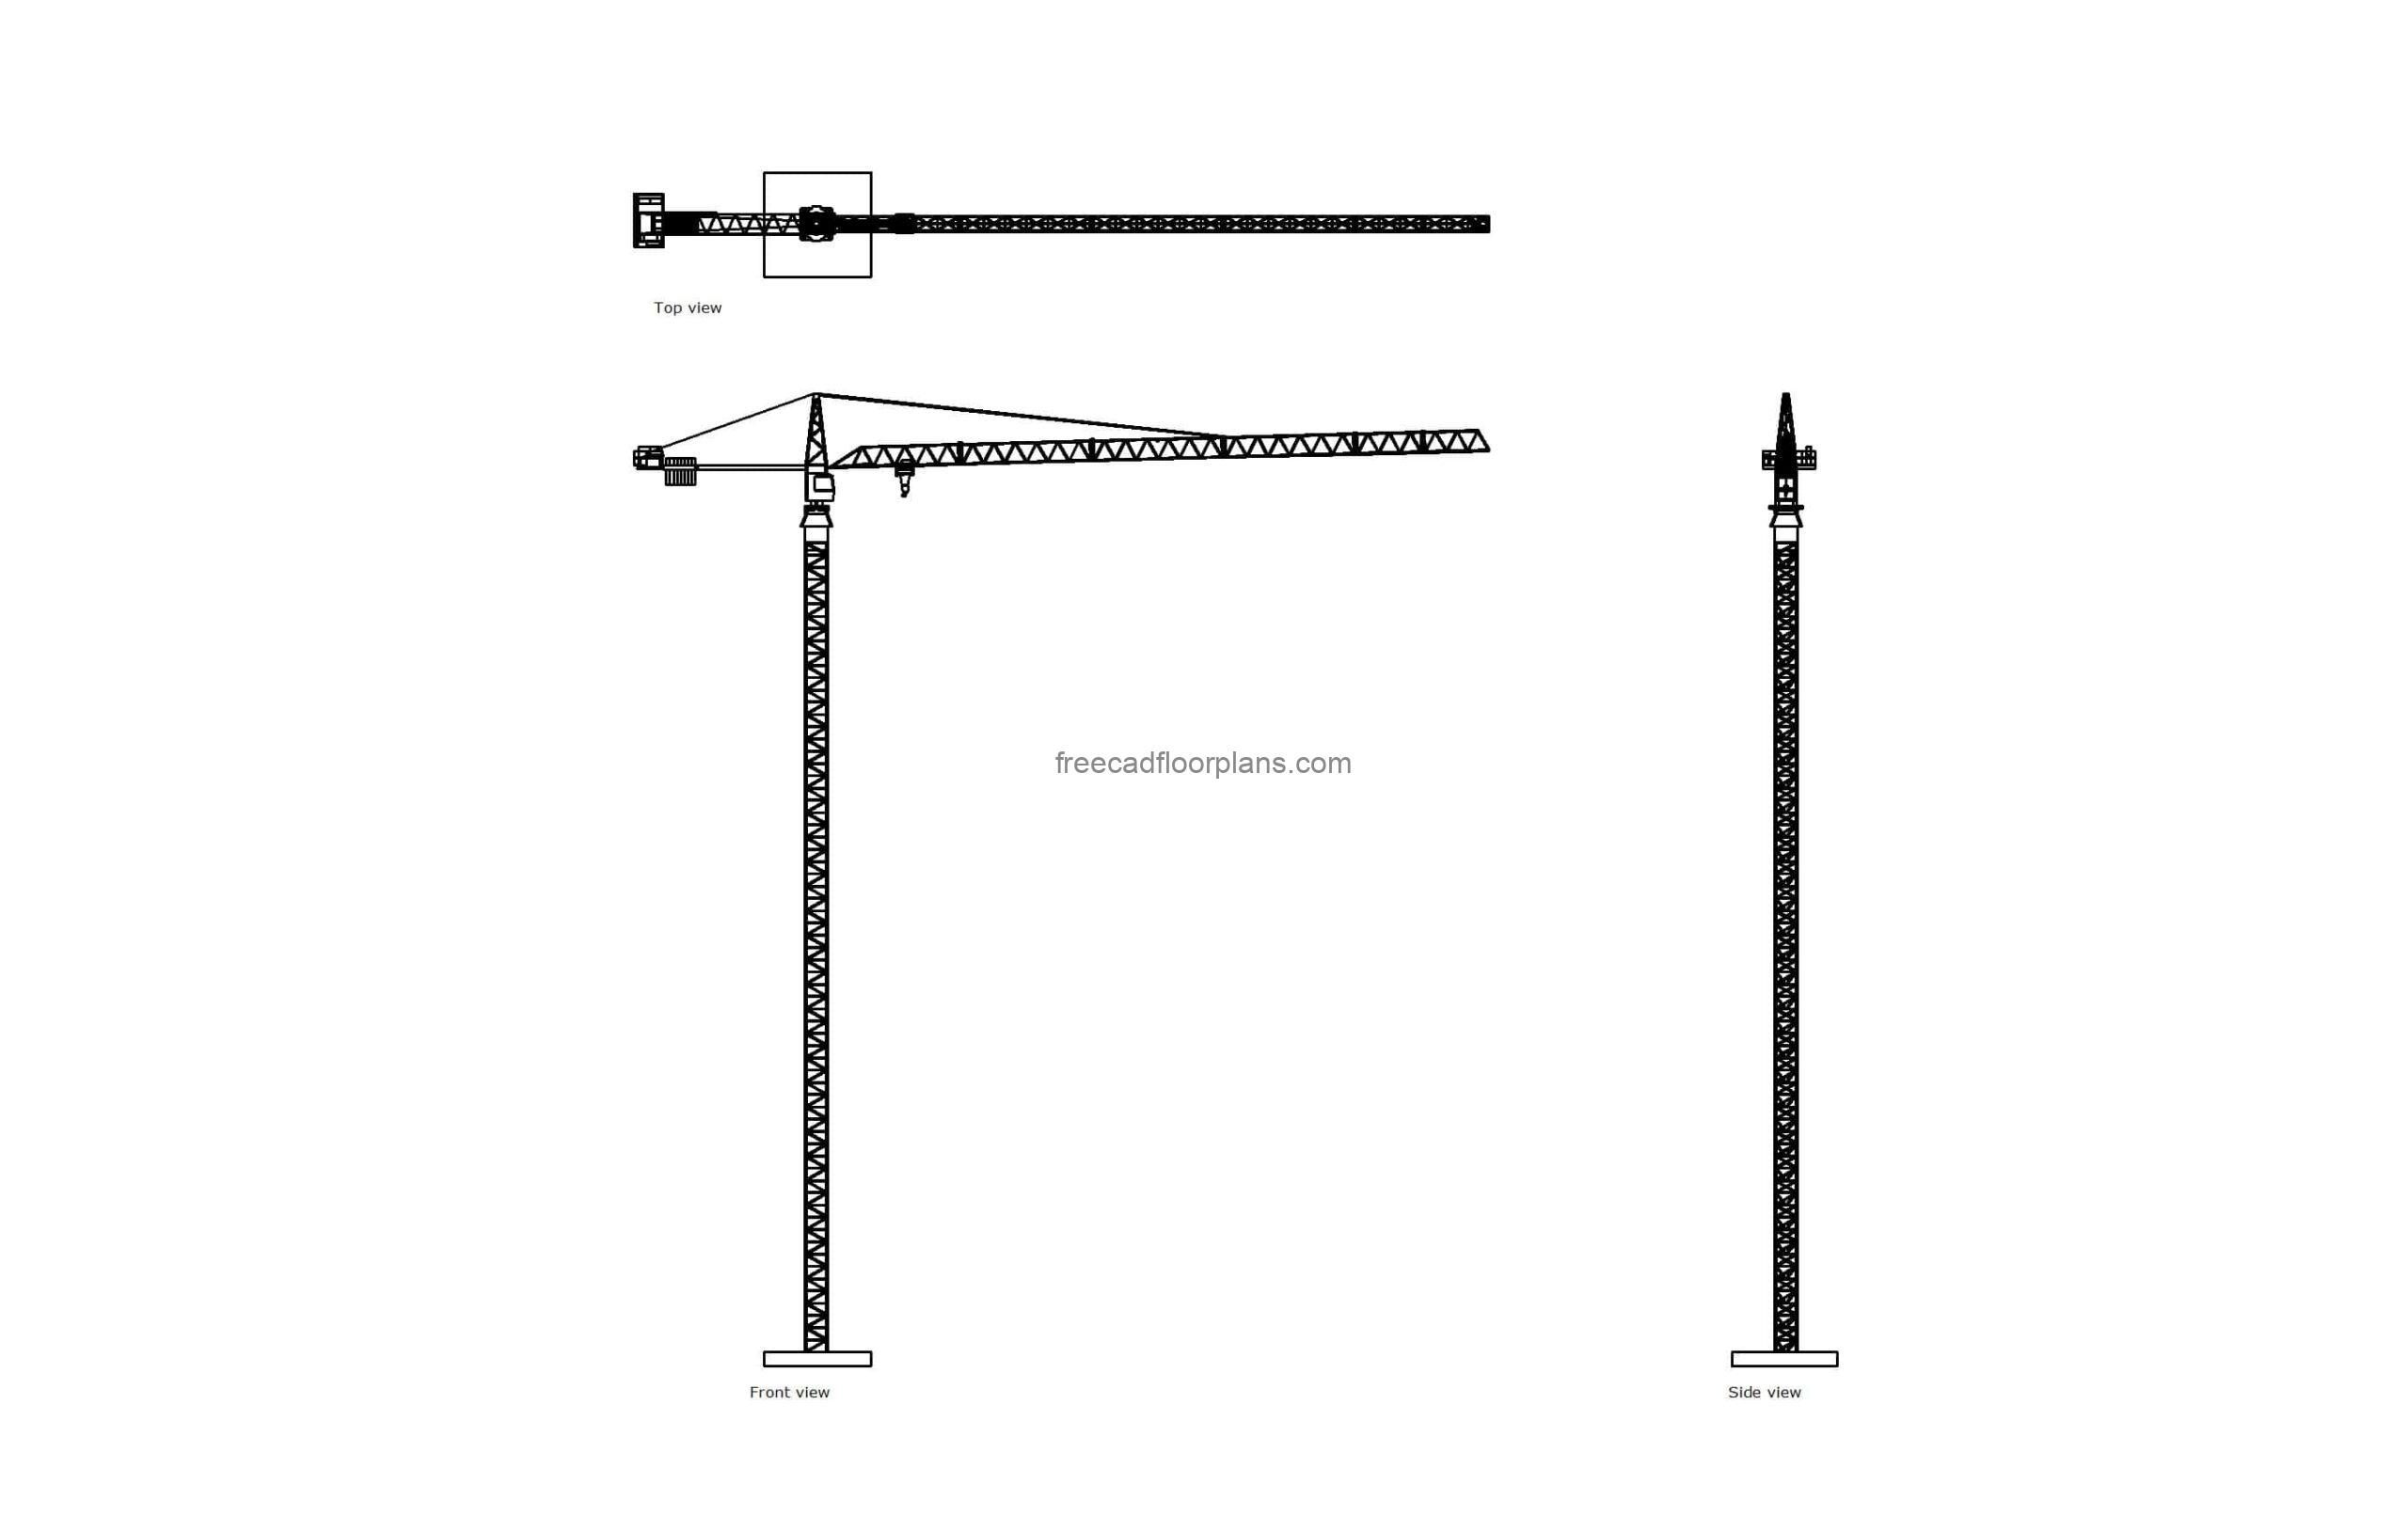 autocad drawing of a hammerhead crane 2d views plan and elevation views, dwg file free for download